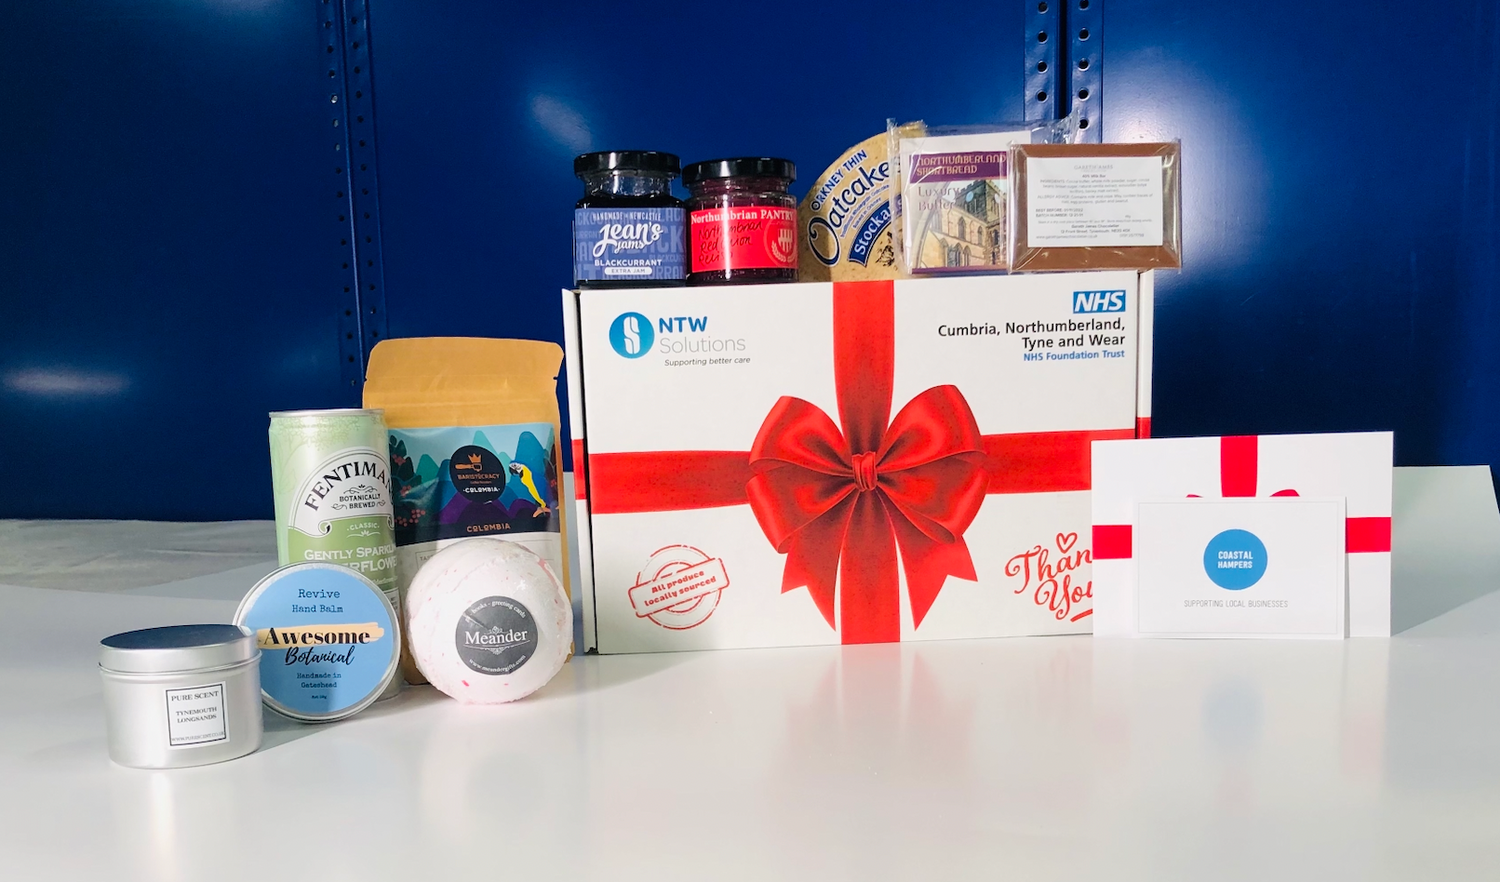 Load video: Video of Coastal Hampers delivering Corporate Gifts for the NHS